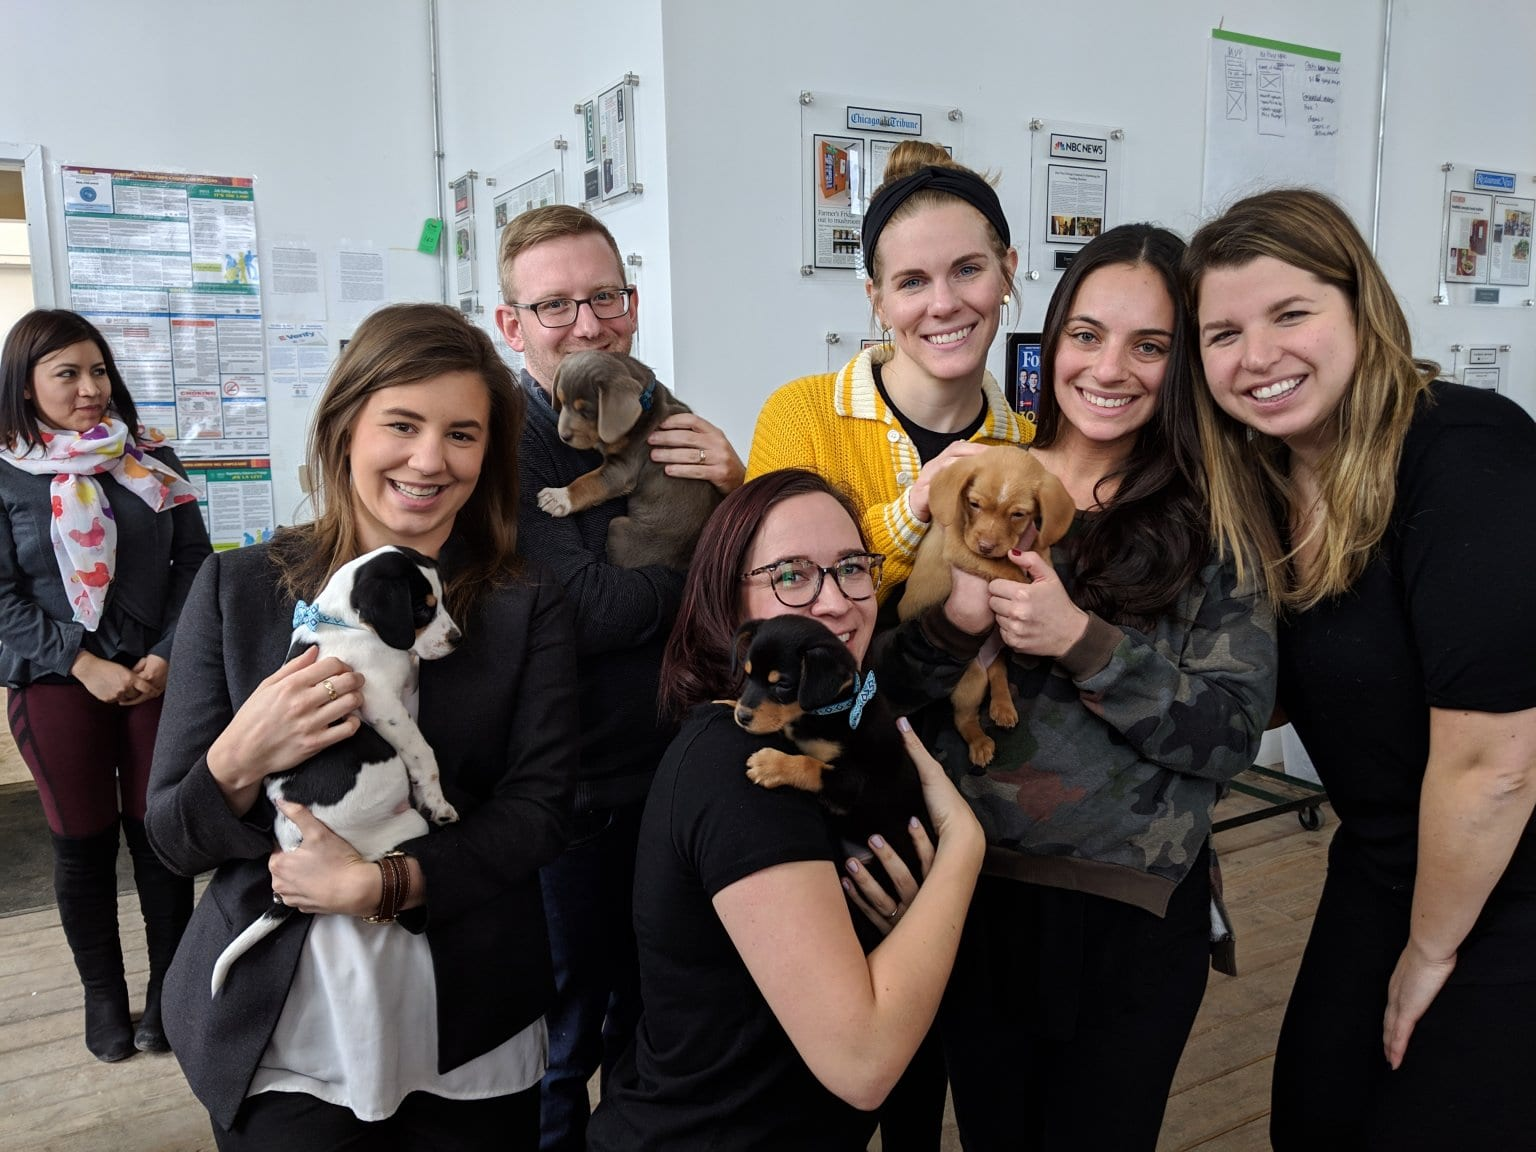 Members of the One Tail at a Time team holding puppies as part of the puppygram program.